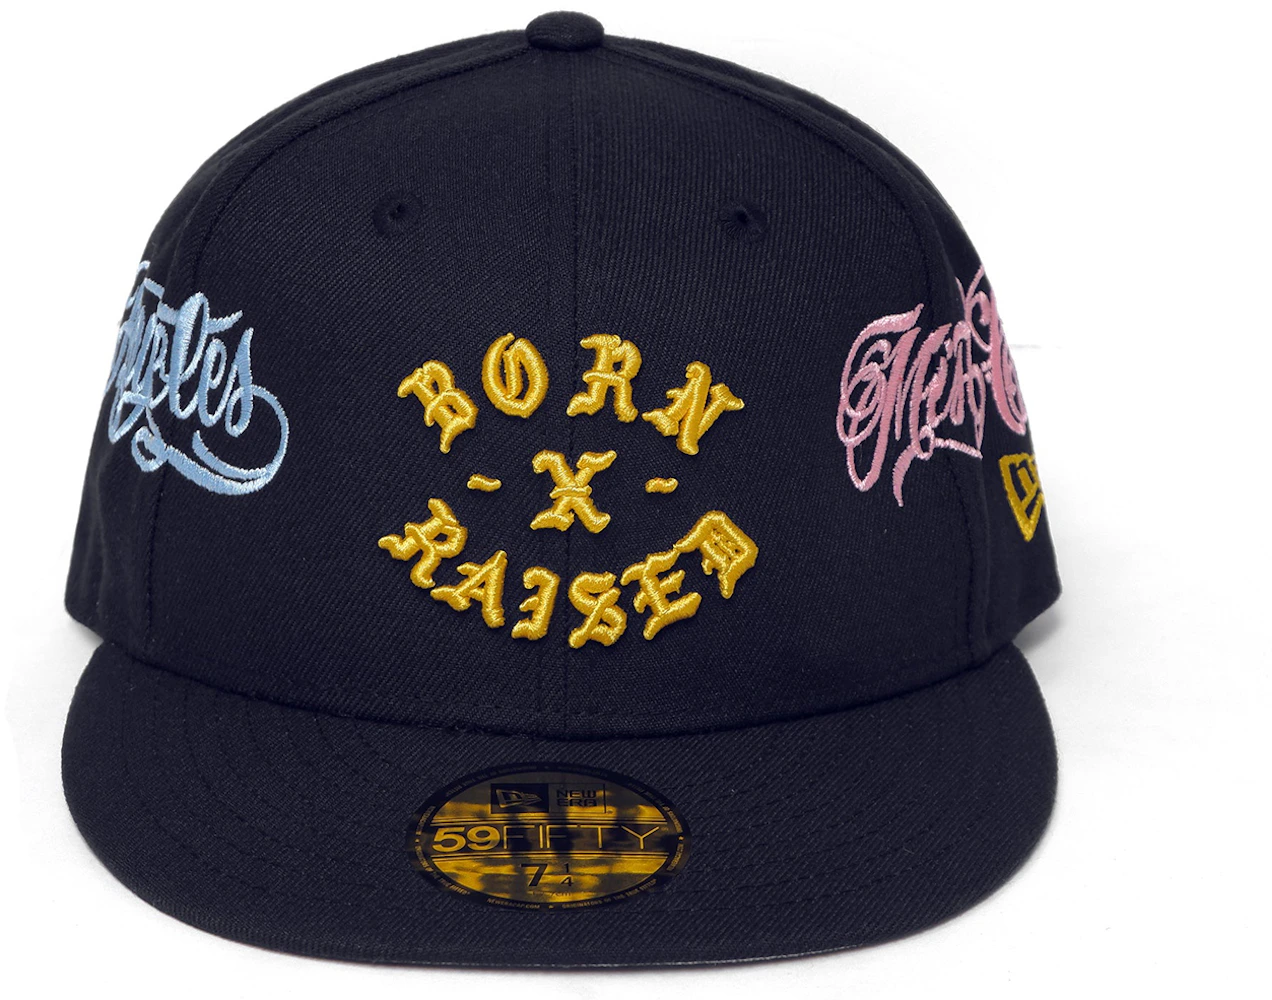 Spanto Commemorated With Born x Raised and Mister Cartoon Capsule